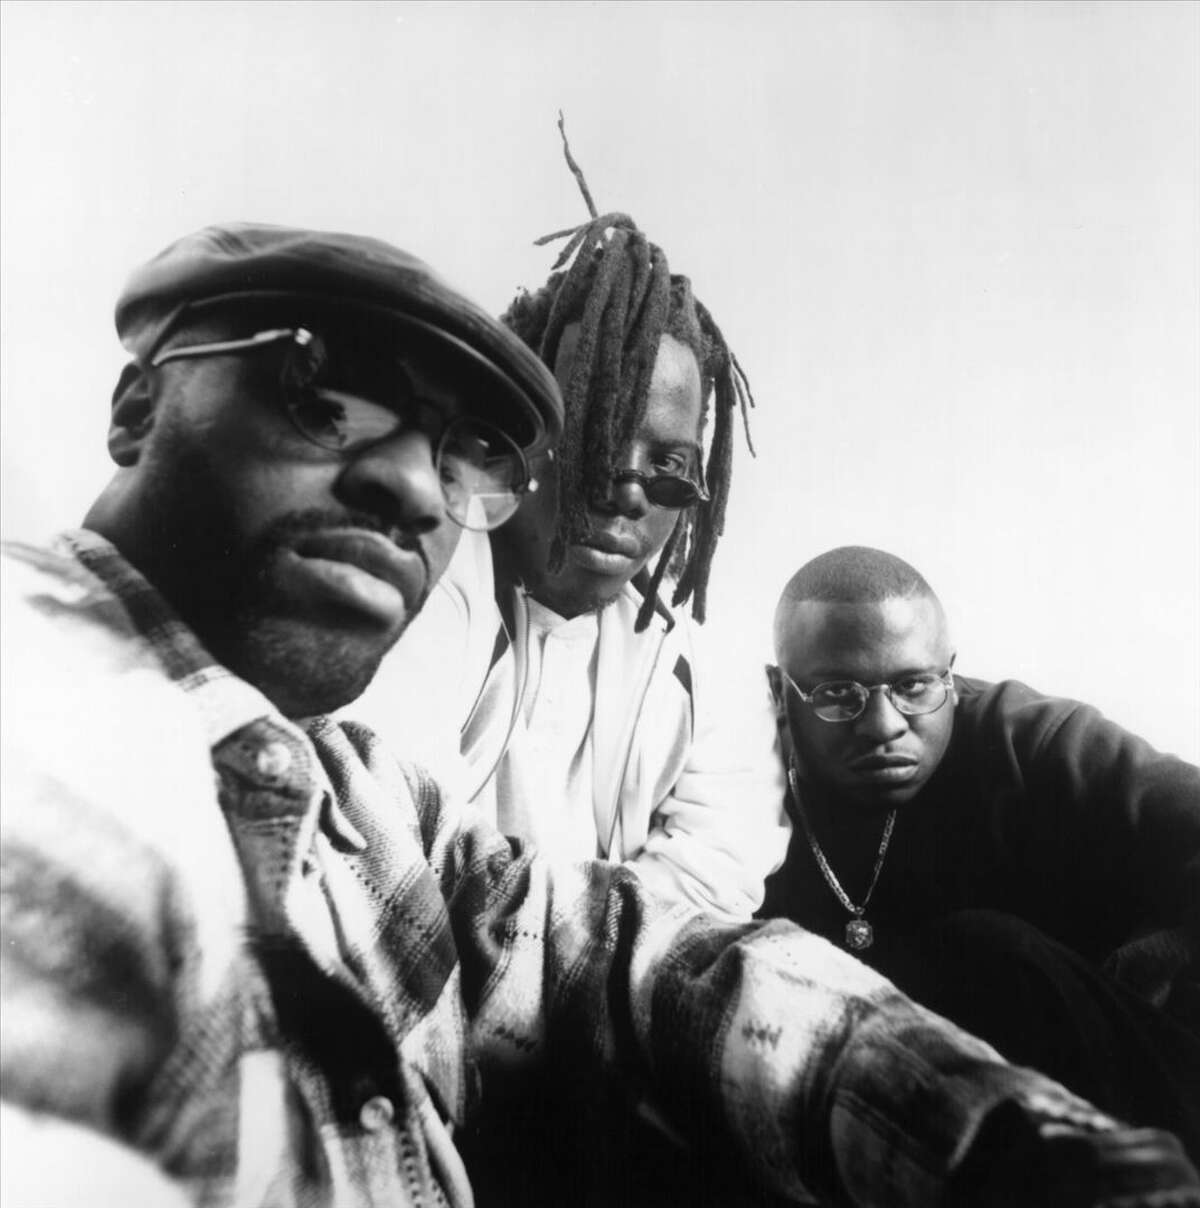 The Geto Boys3:40 p.m. June 1, Stage 5